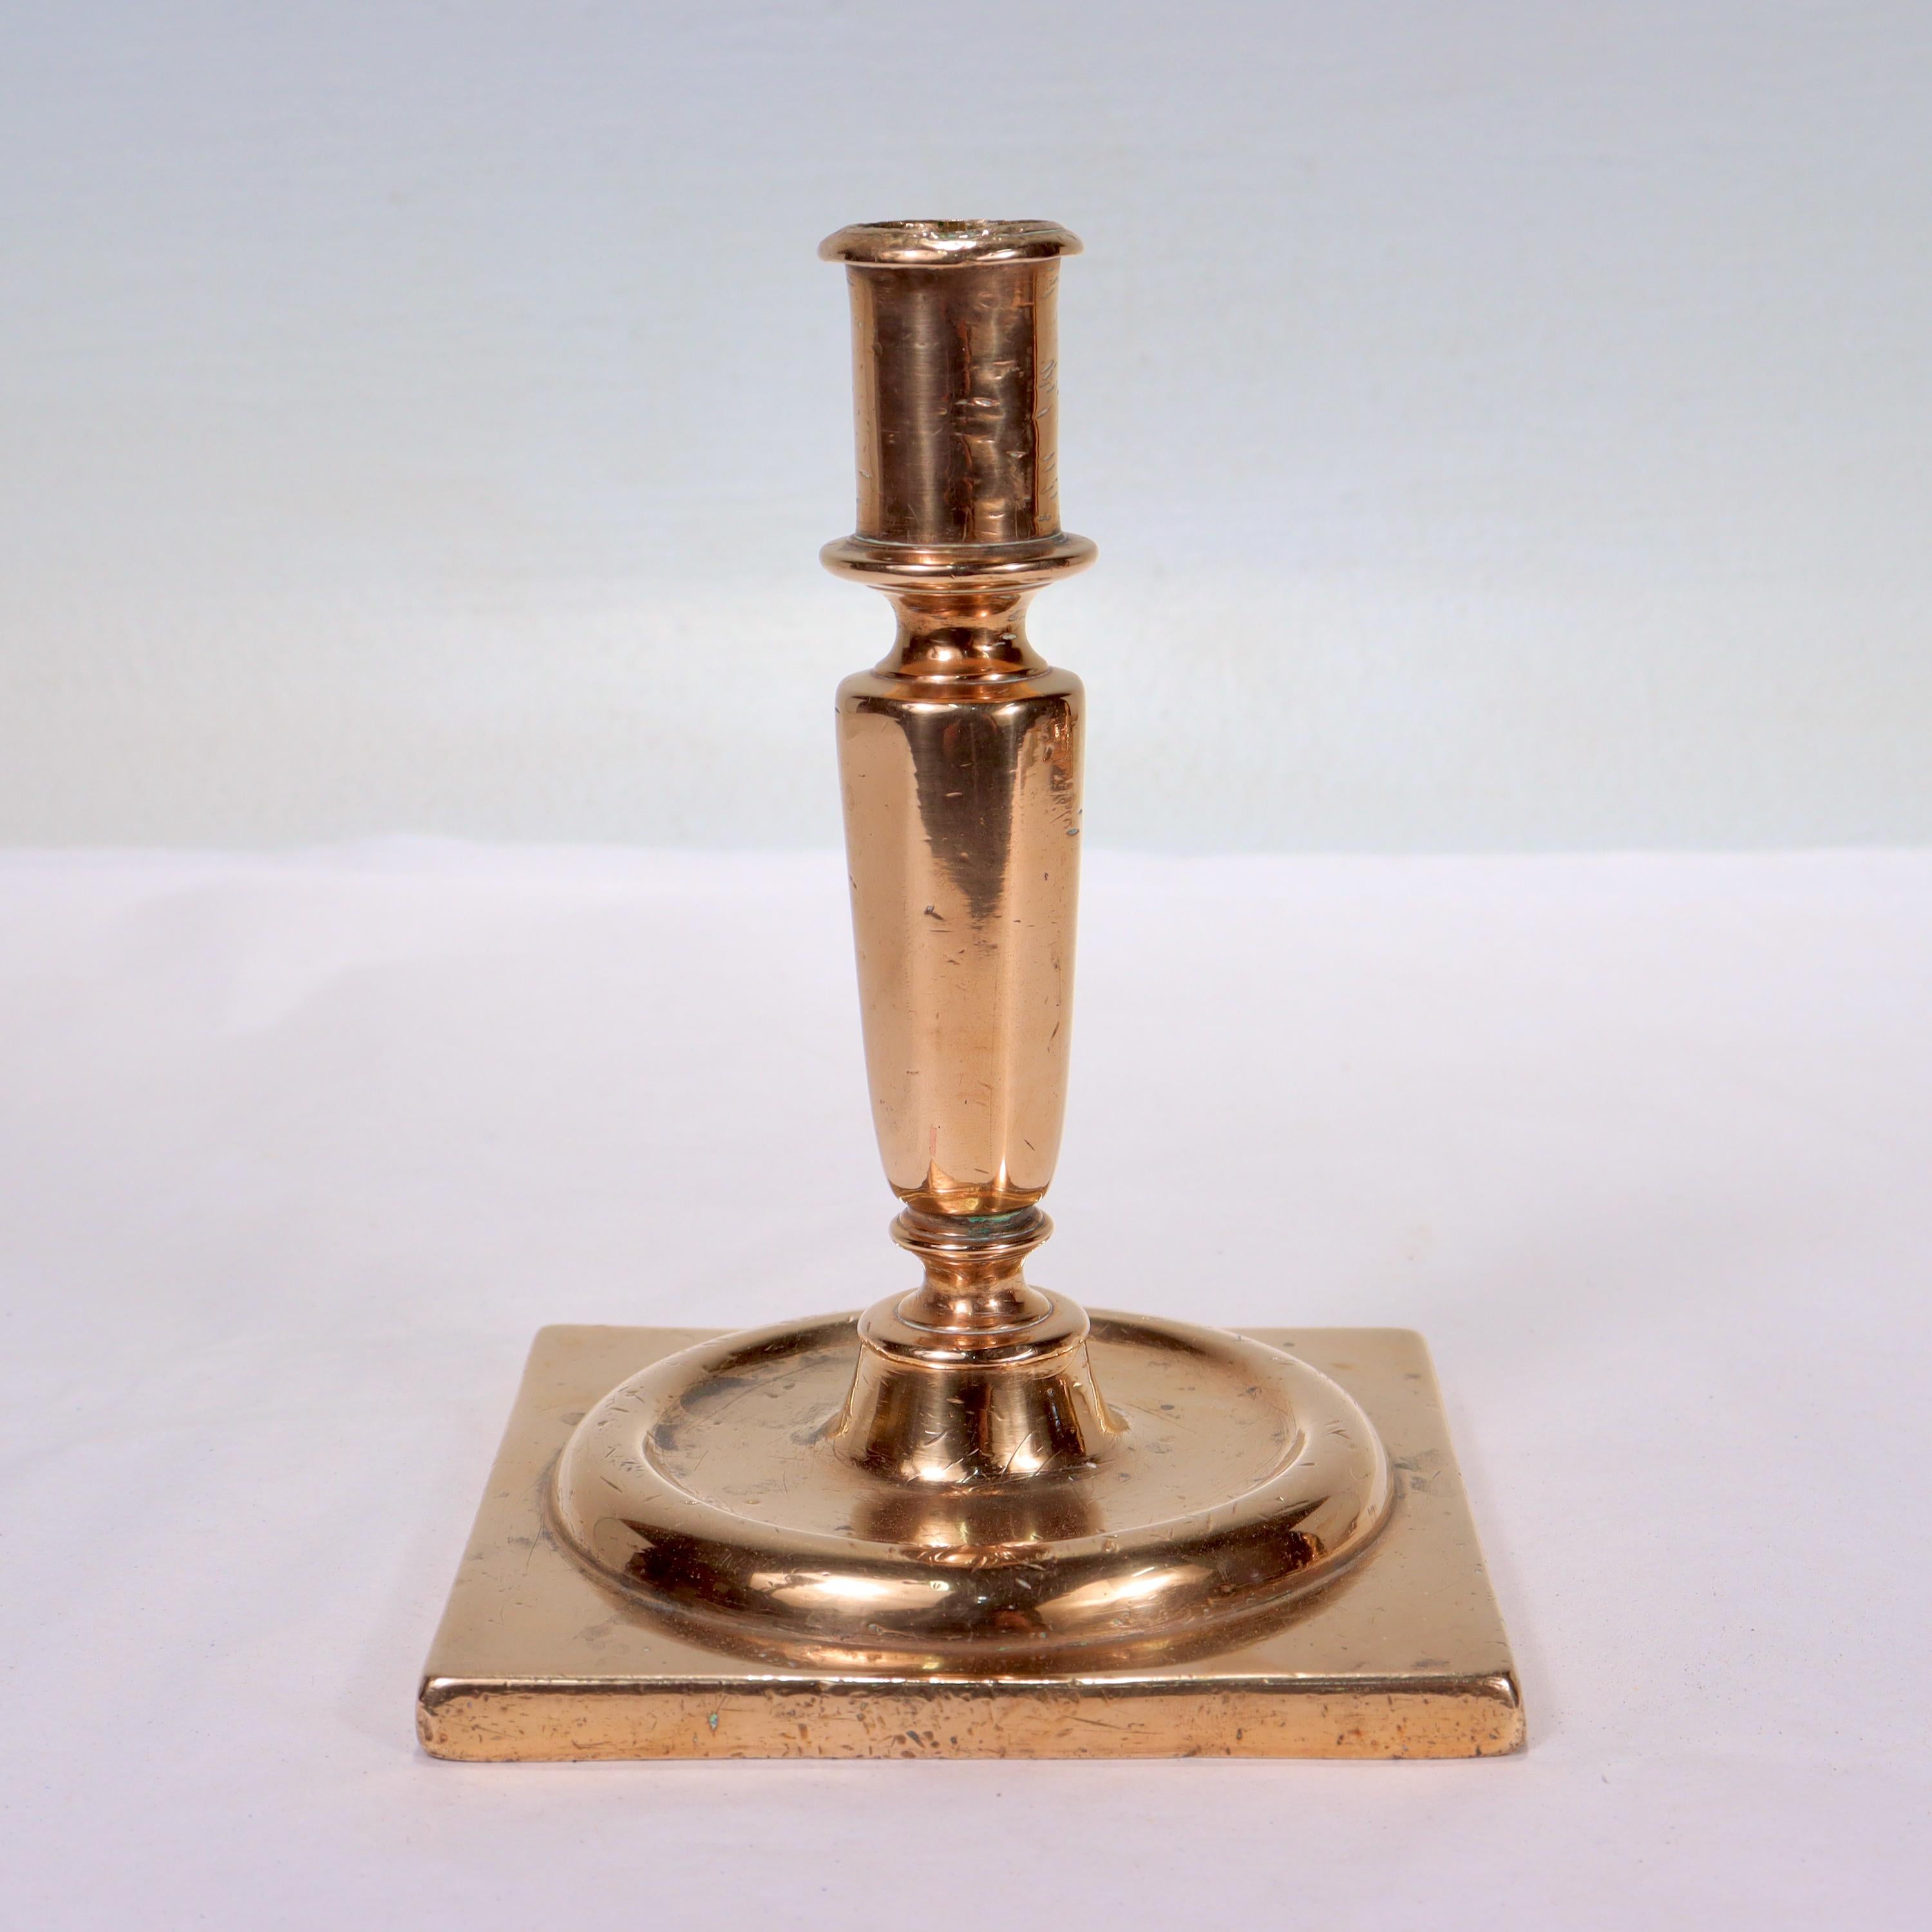 A fine antique bronze candlestick. 

Dating from the end of the 17th century.

Likely Dutch or English.

With a slightly orange hue and a wide square base supporting a tapered, faceted stem & cylindrical candle cup with a wax hole. The